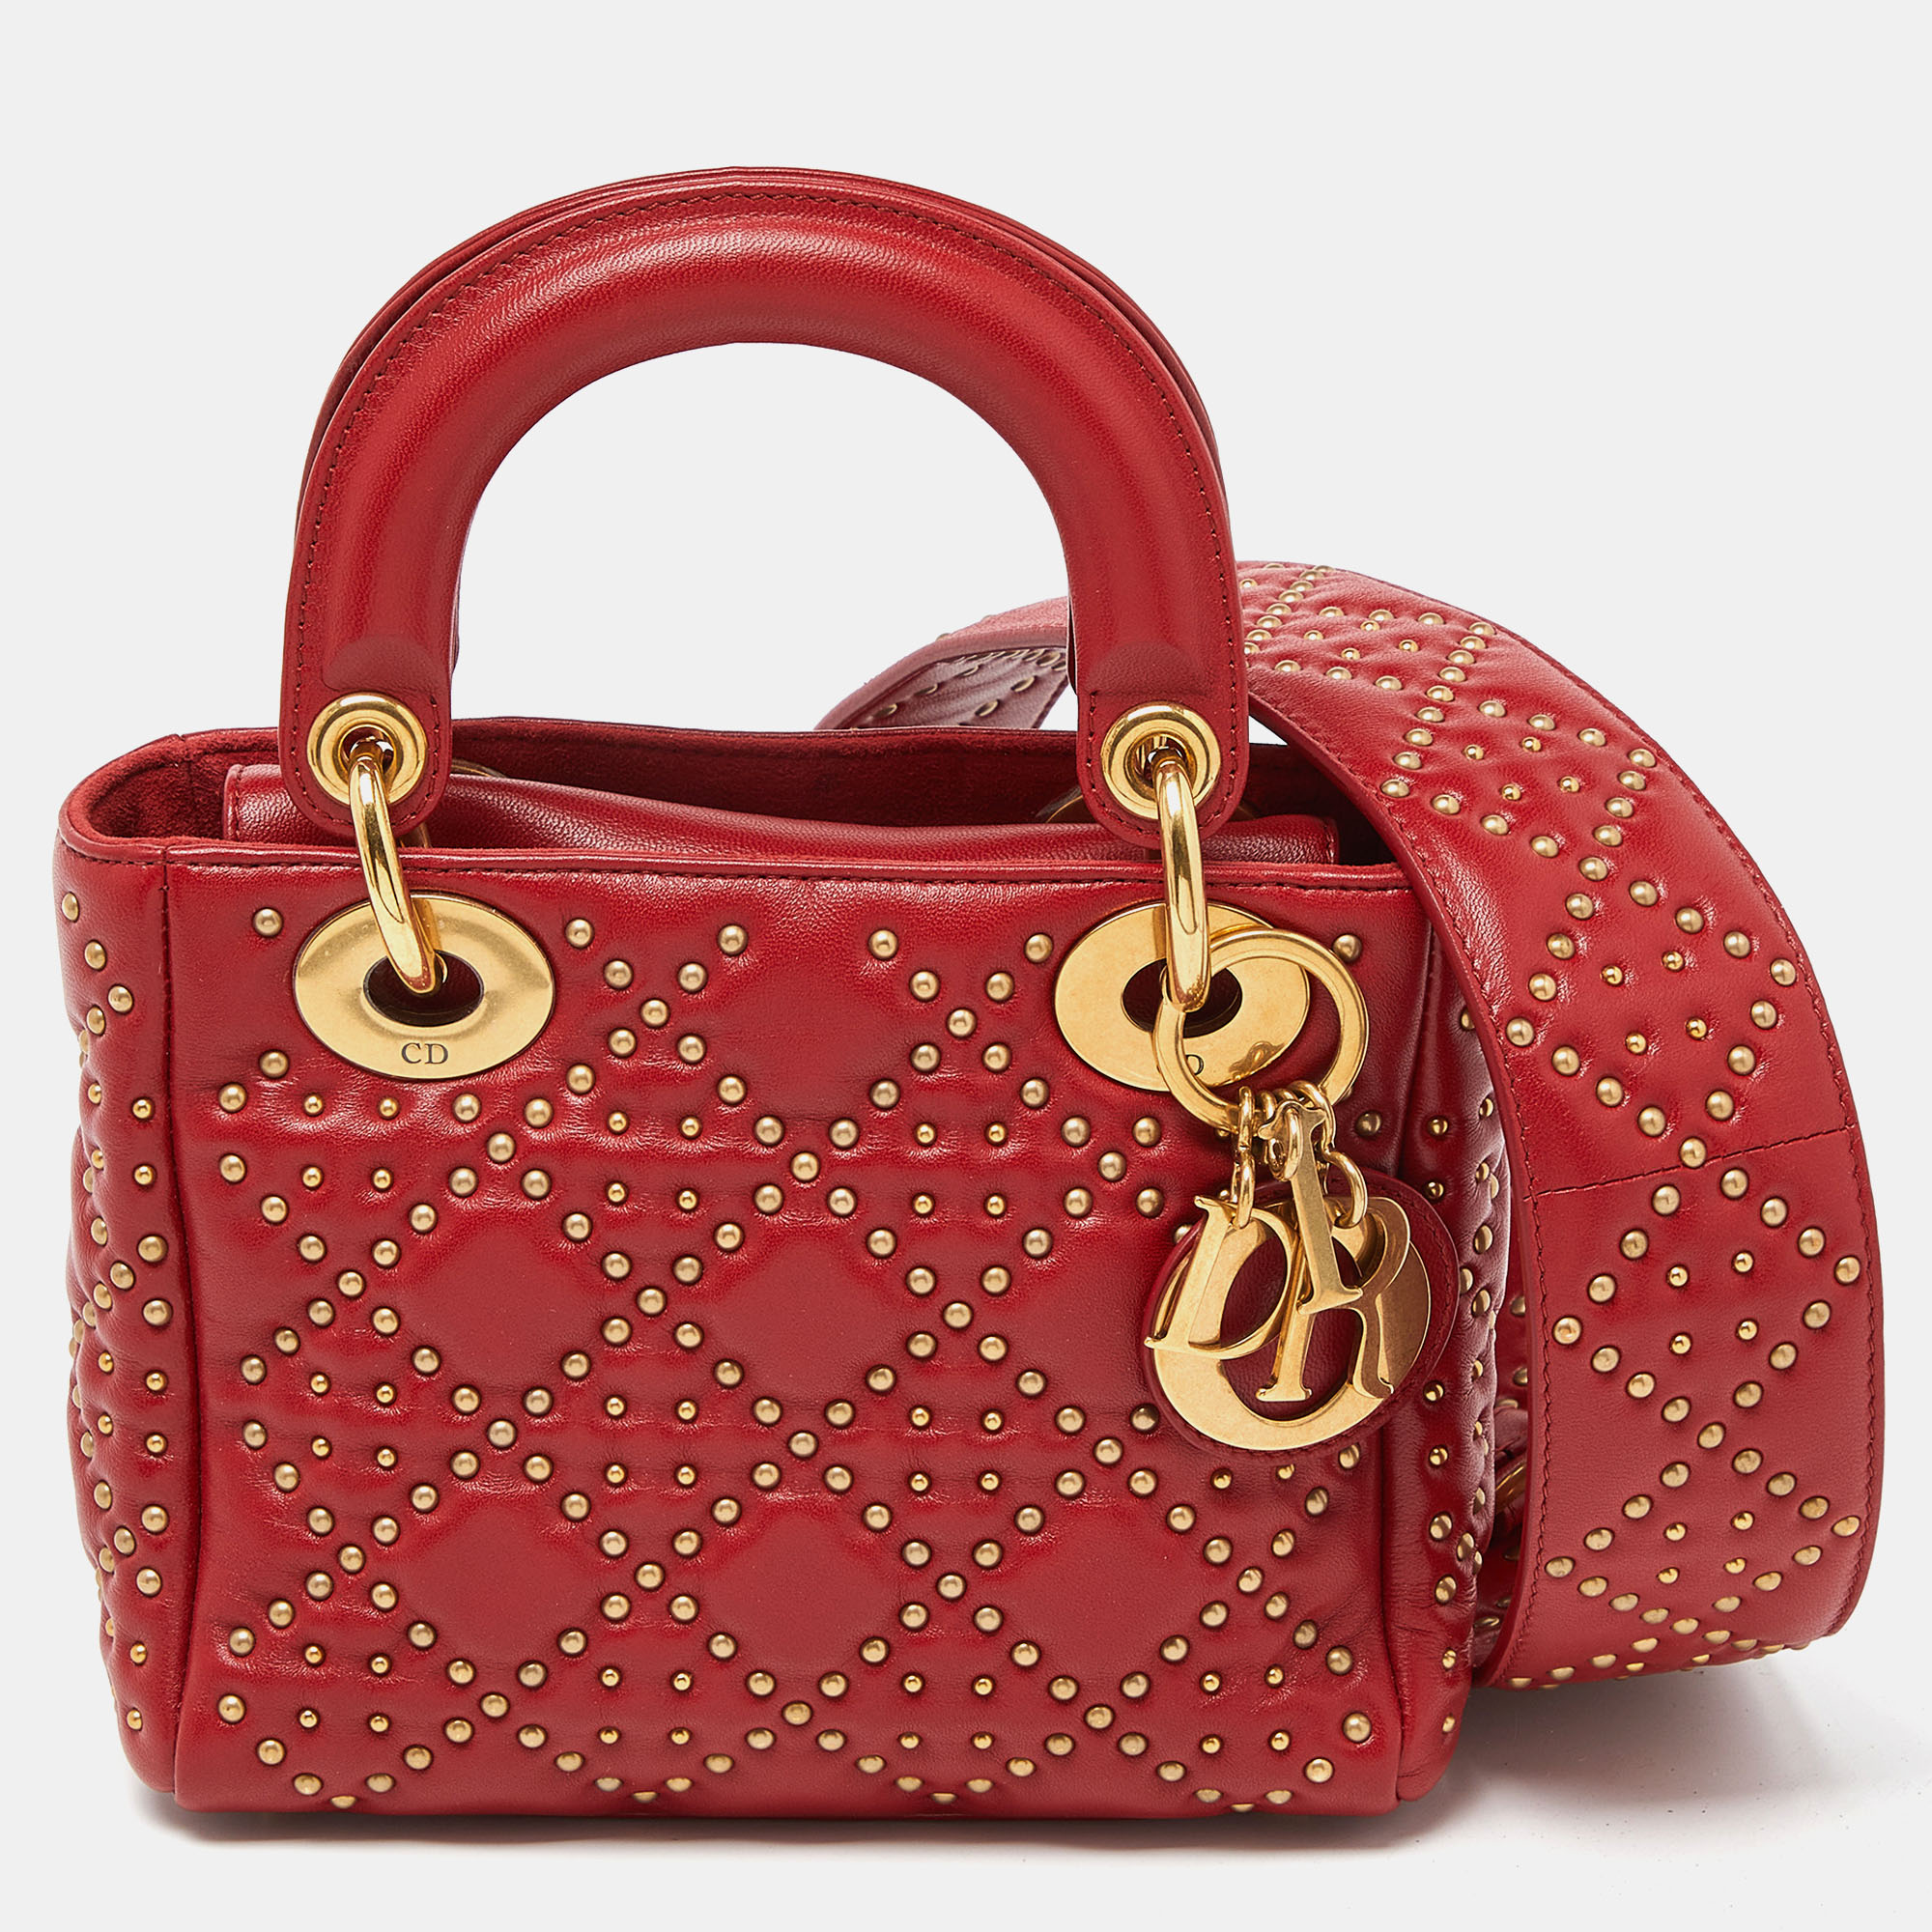 Dior red leather mini lady dior studded tote